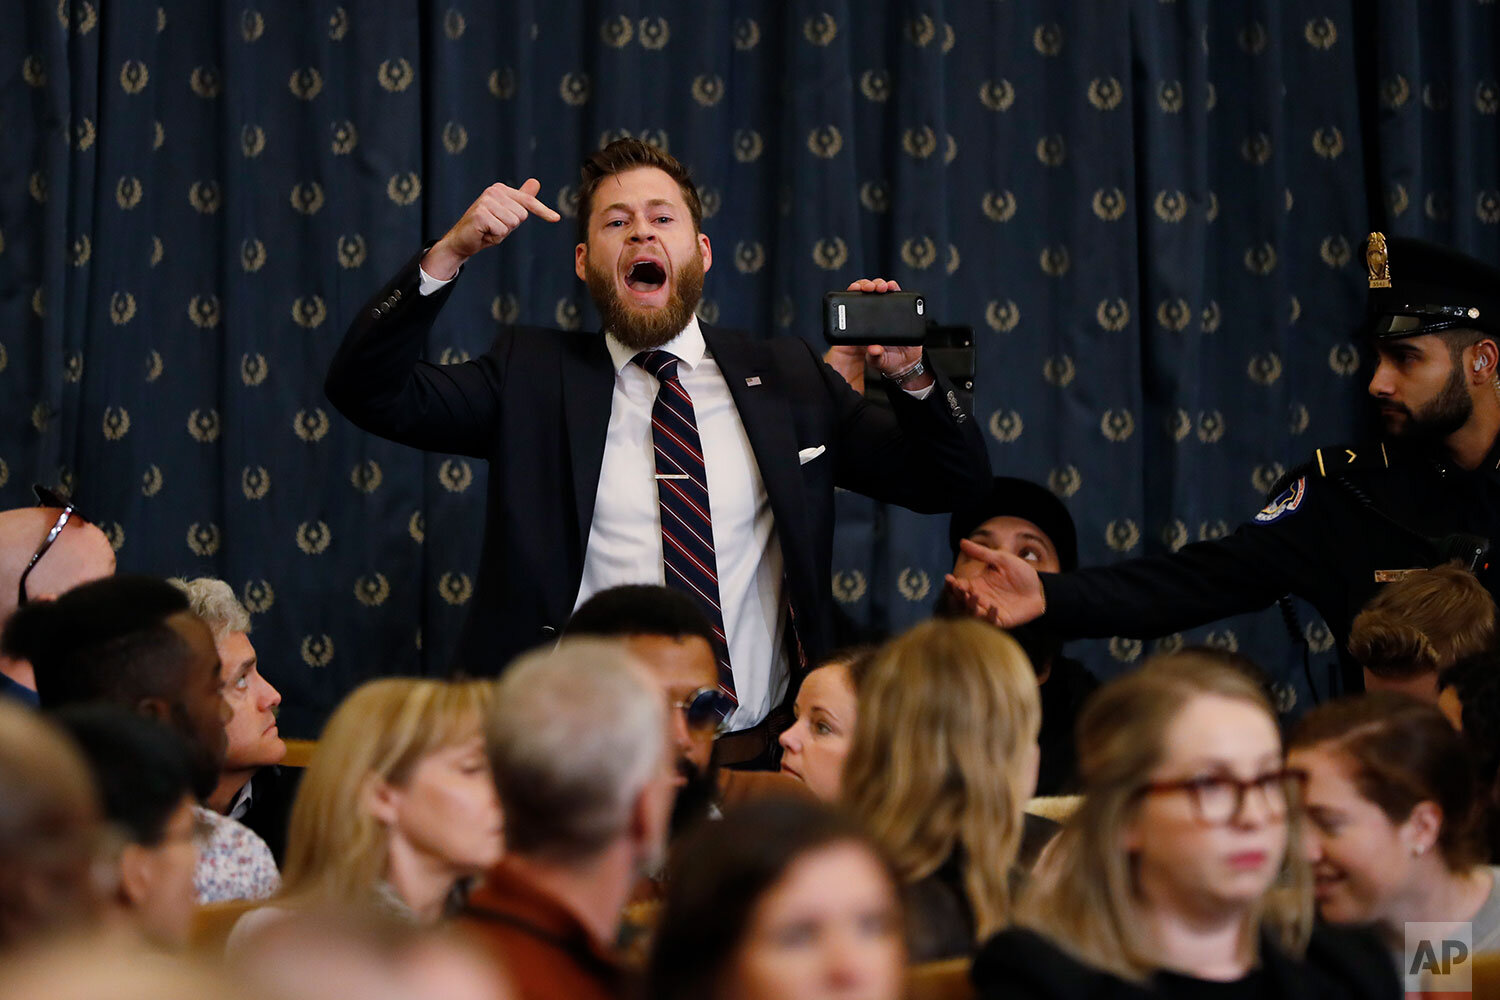  A protestor speaks out as the House Judiciary Committee hears investigative findings in the impeachment inquiry of President Donald Trump, Monday, Dec. 9, 2019, on Capitol Hill in Washington. (AP Photo/Andrew Harnik) 